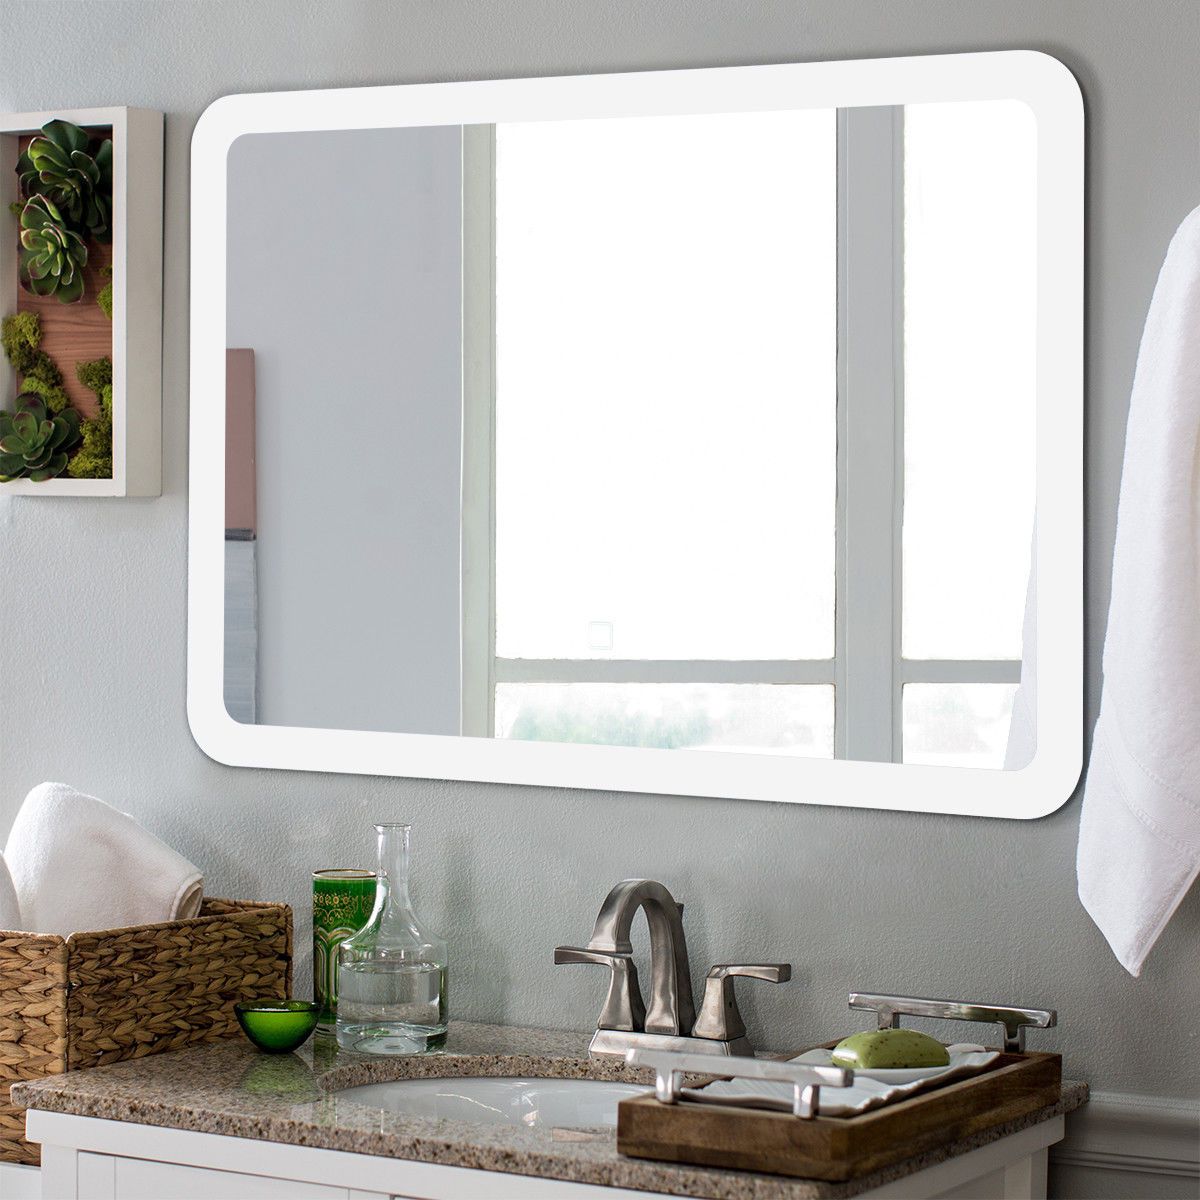 Costway Led Wall Mounted Mirror Bathroom Makeup Illuminated Rounded Arc With Regard To Cut Corner Wall Mirrors (Photo 5 of 15)